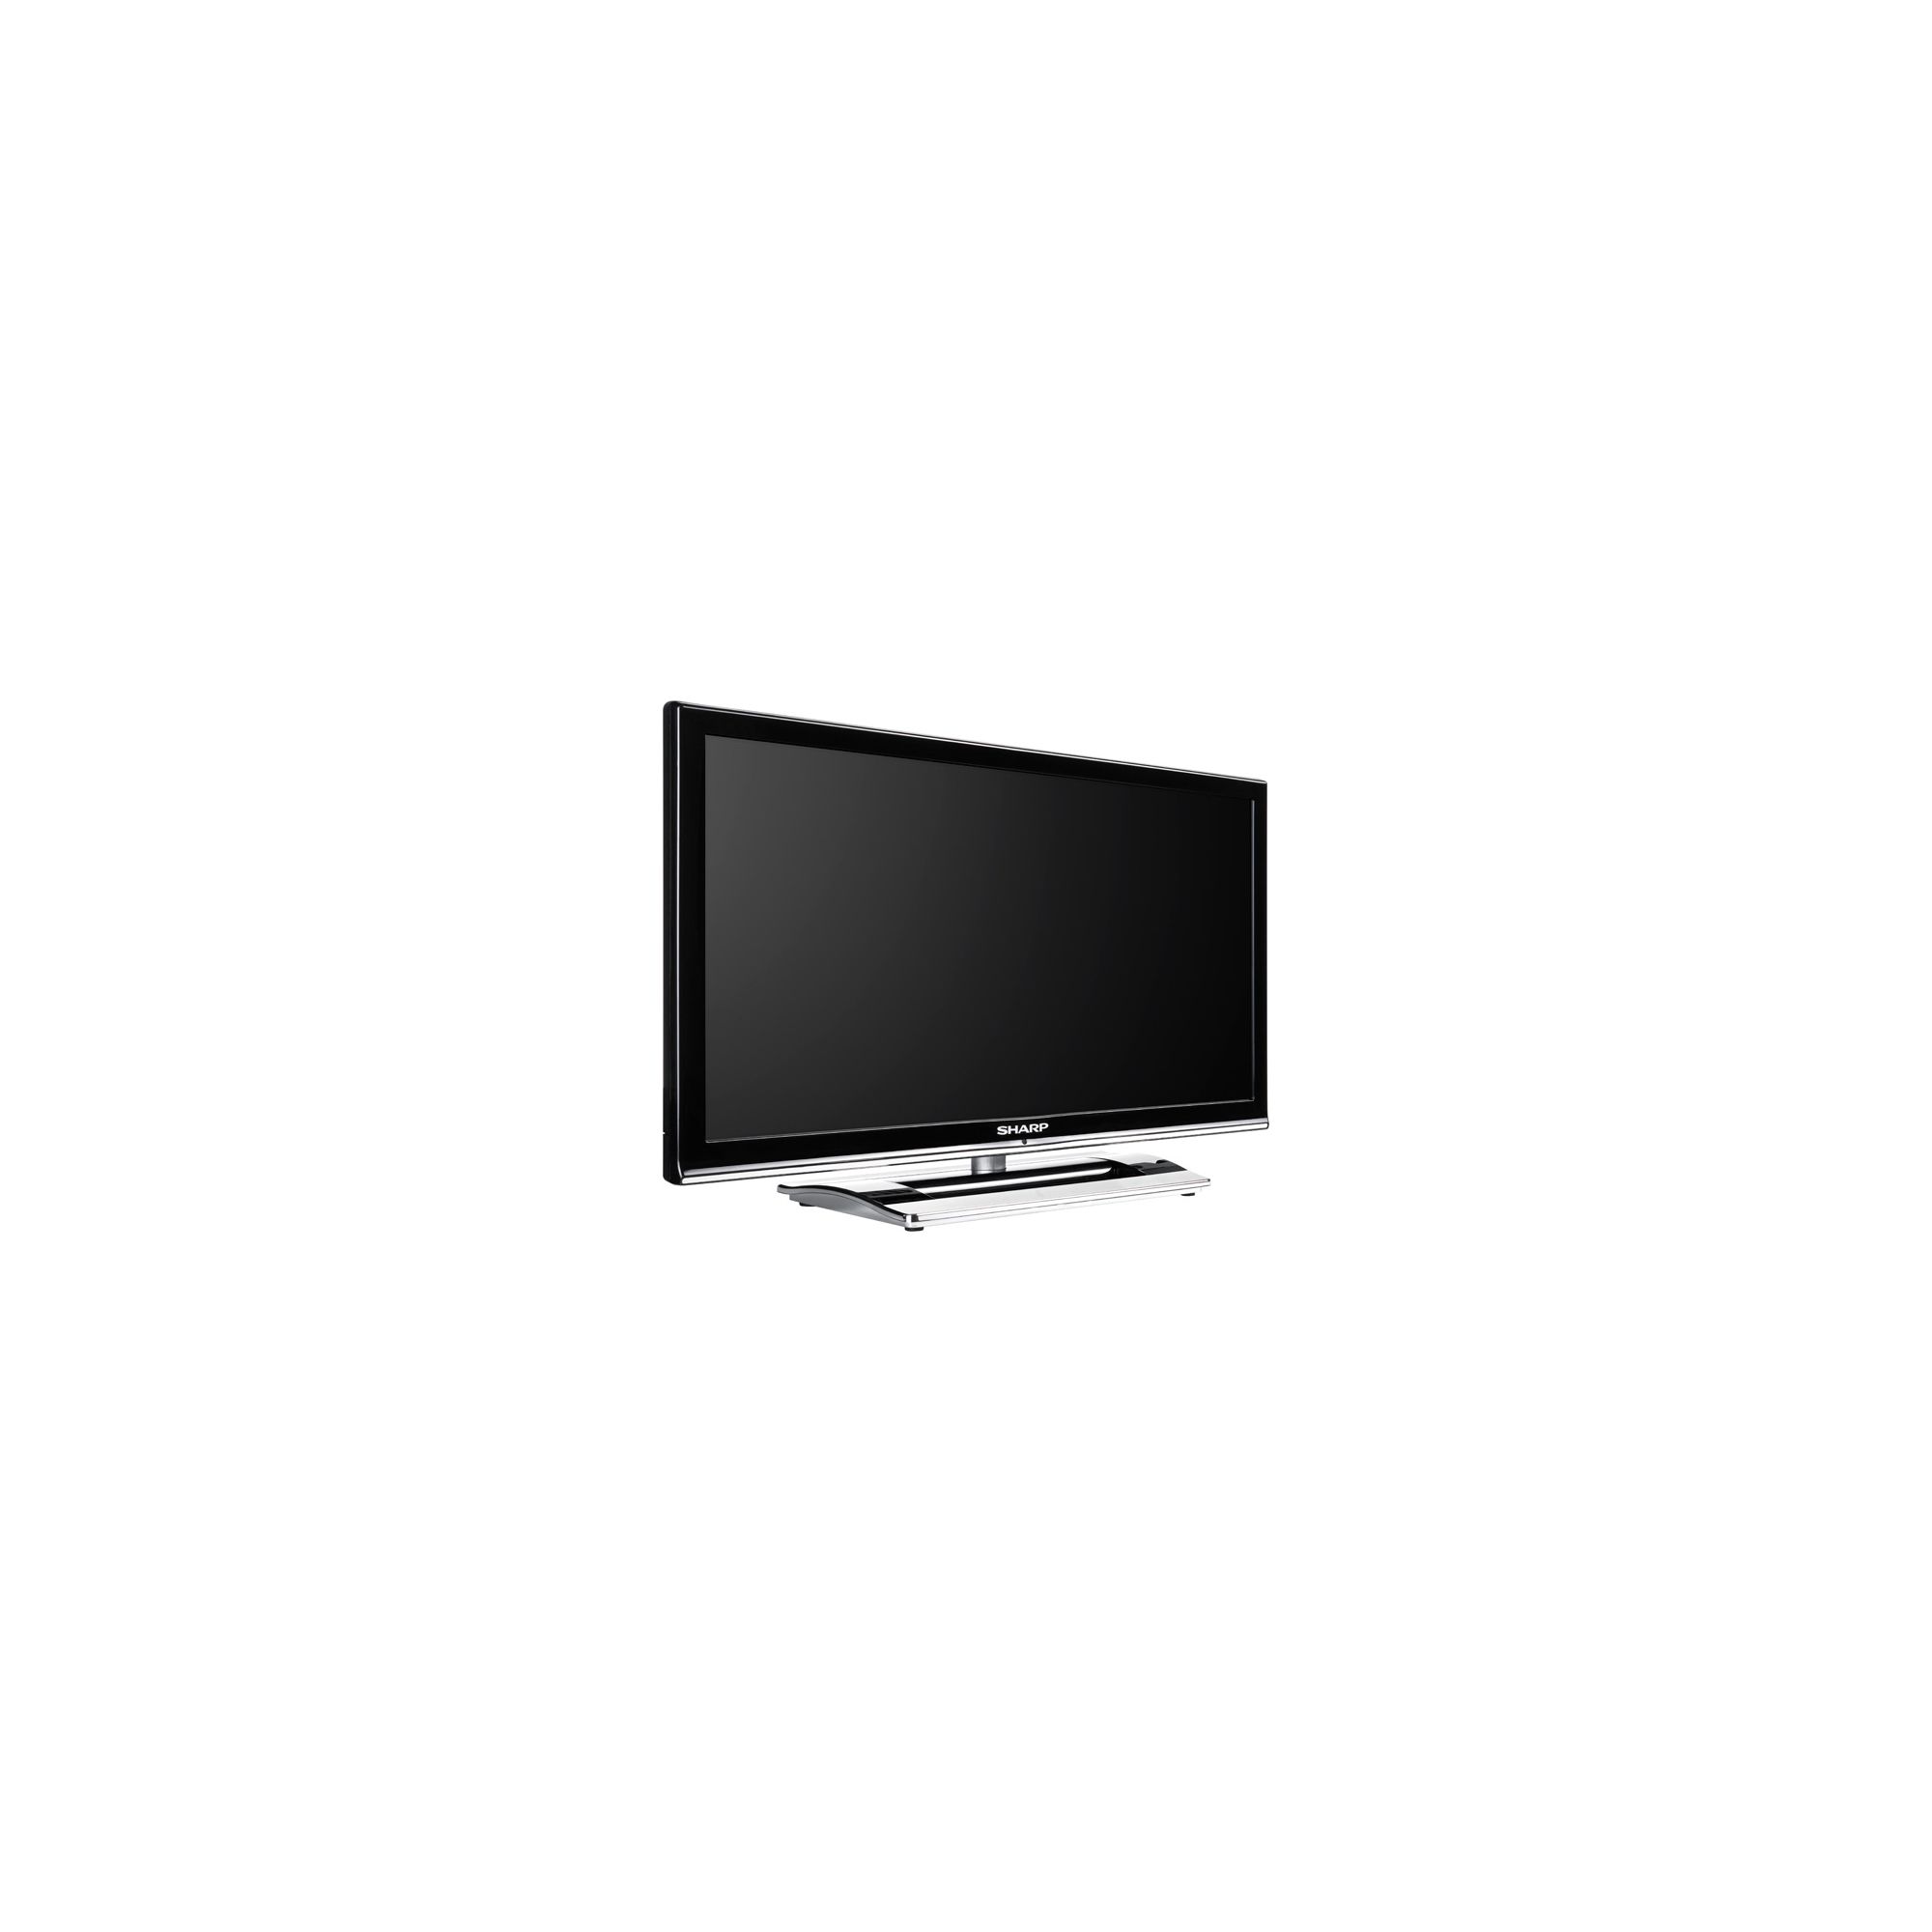 Sharp 22LE250K 22 inch Full HD 1080p LED TV with Freeview